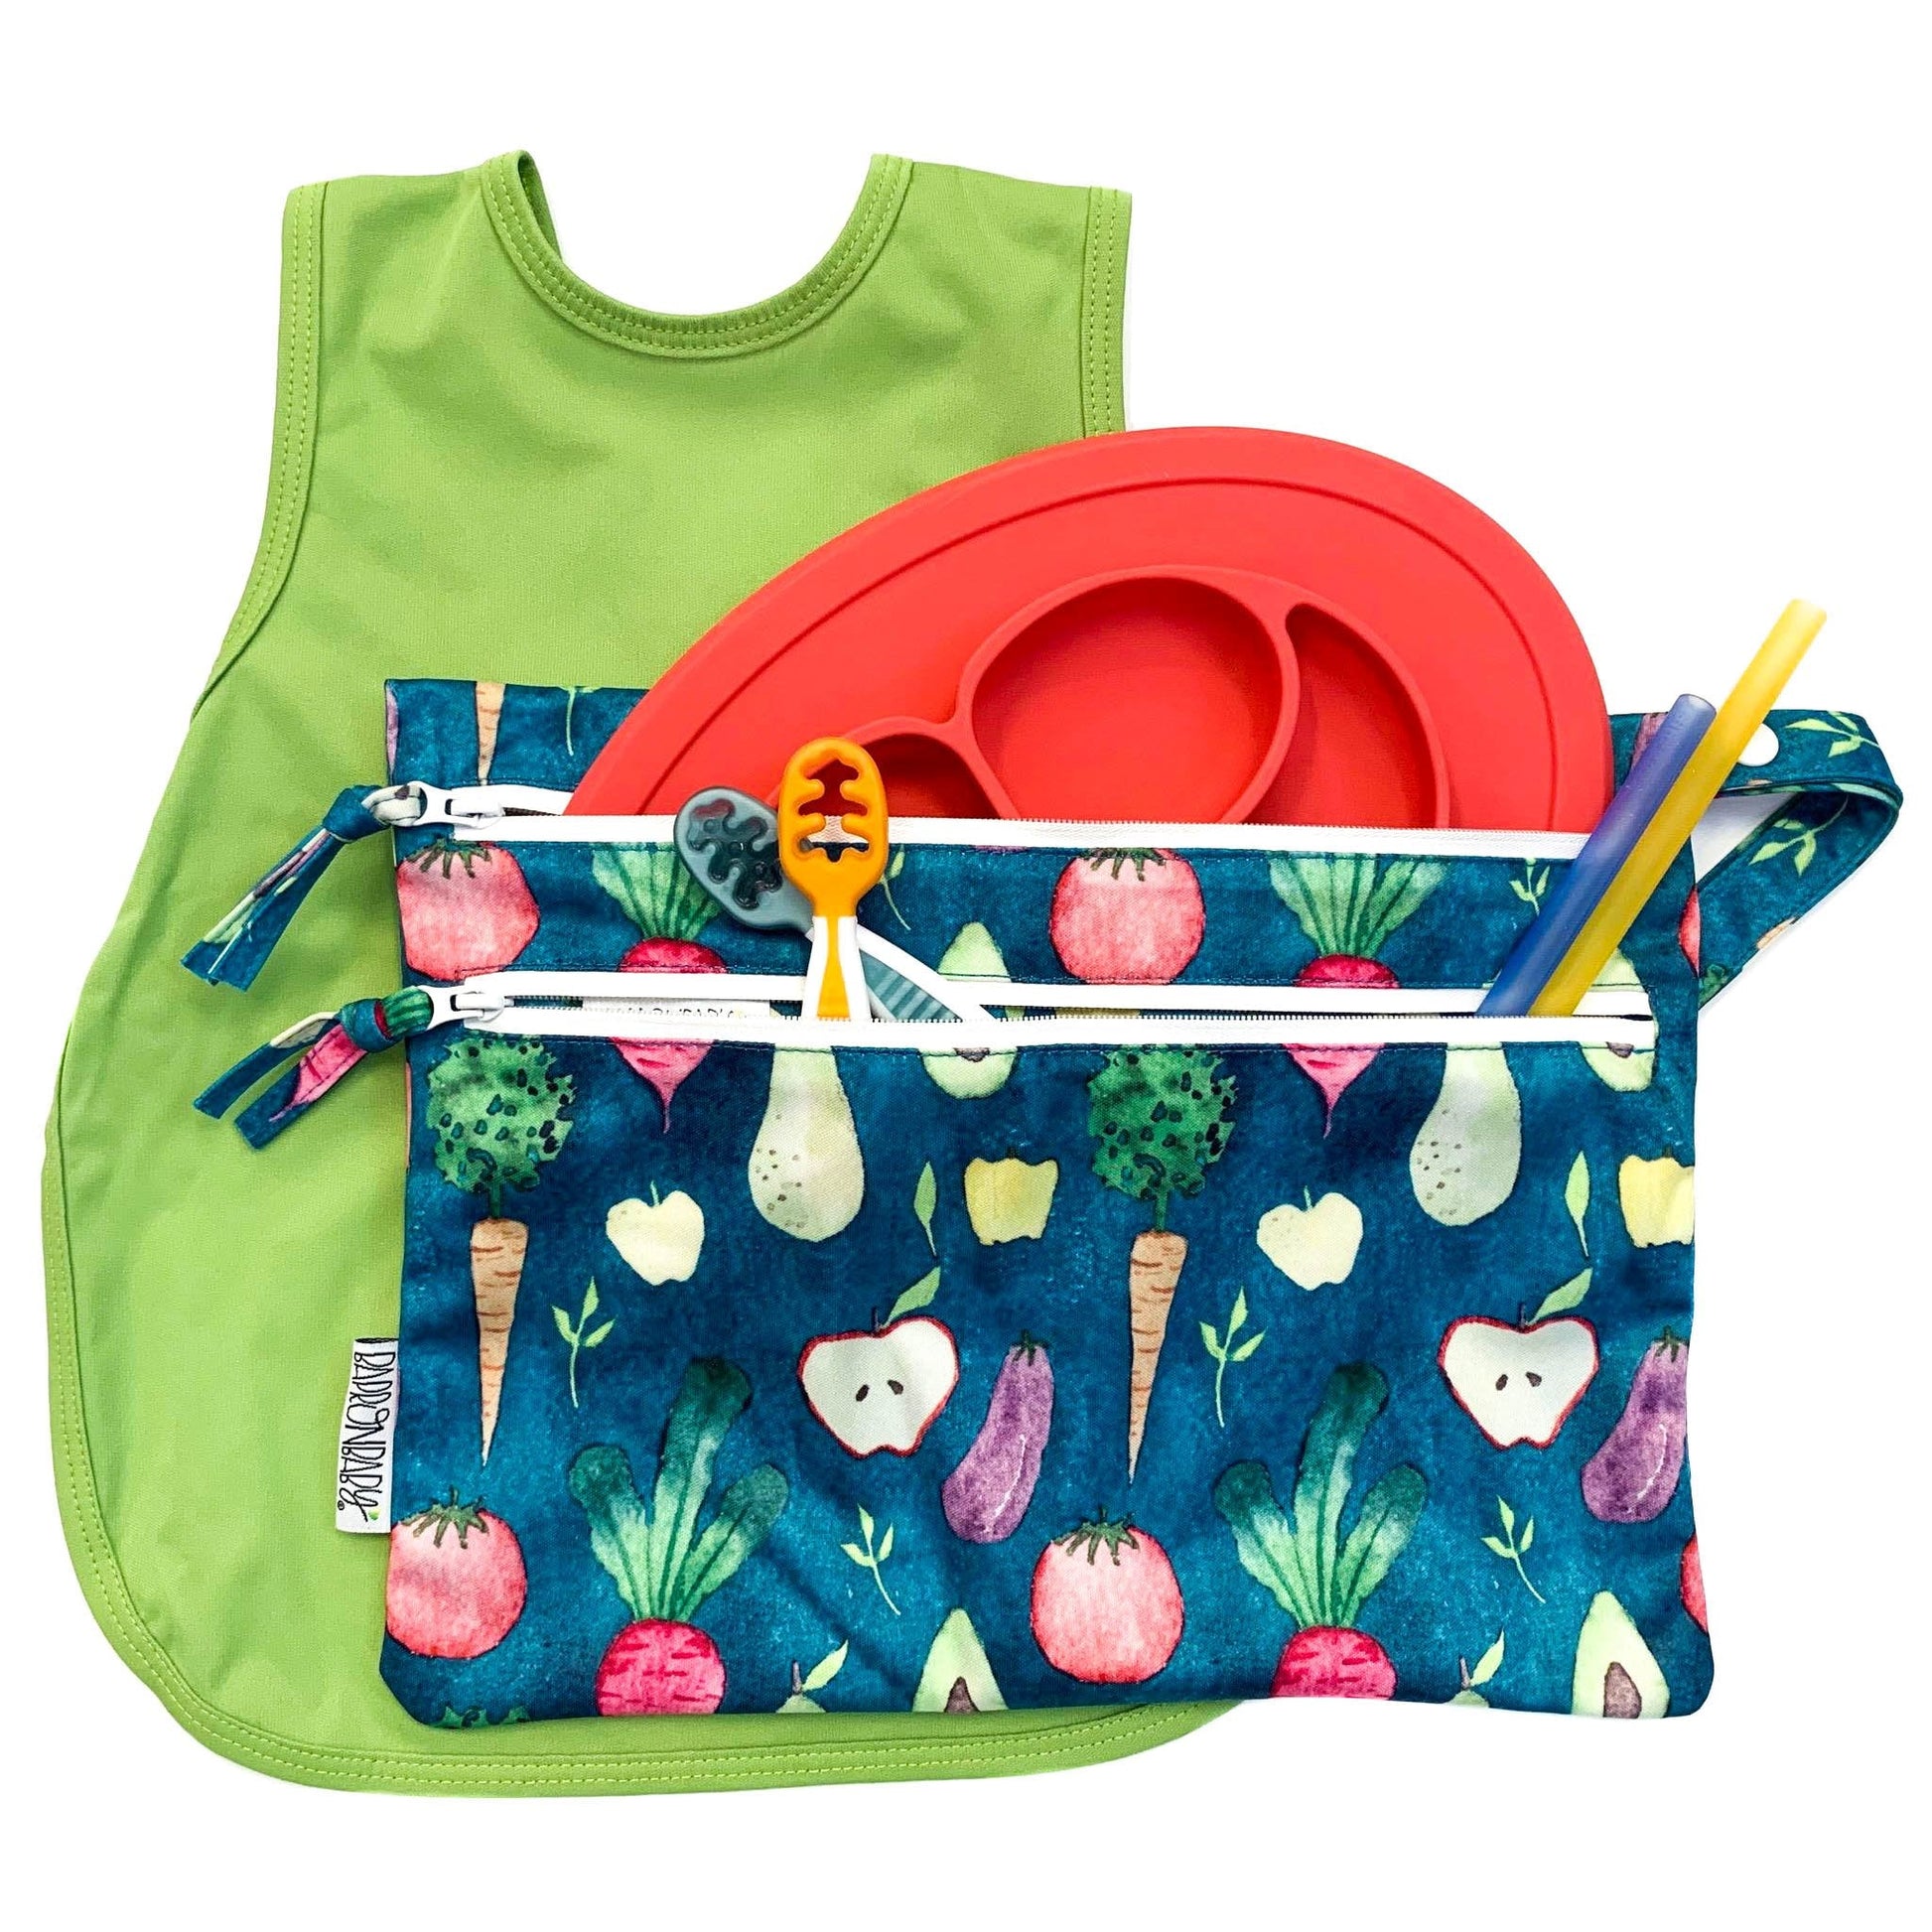 Organic Produce - Waterproof Wet Bag (For mealtime, on-the-go, and more!) - WERONE